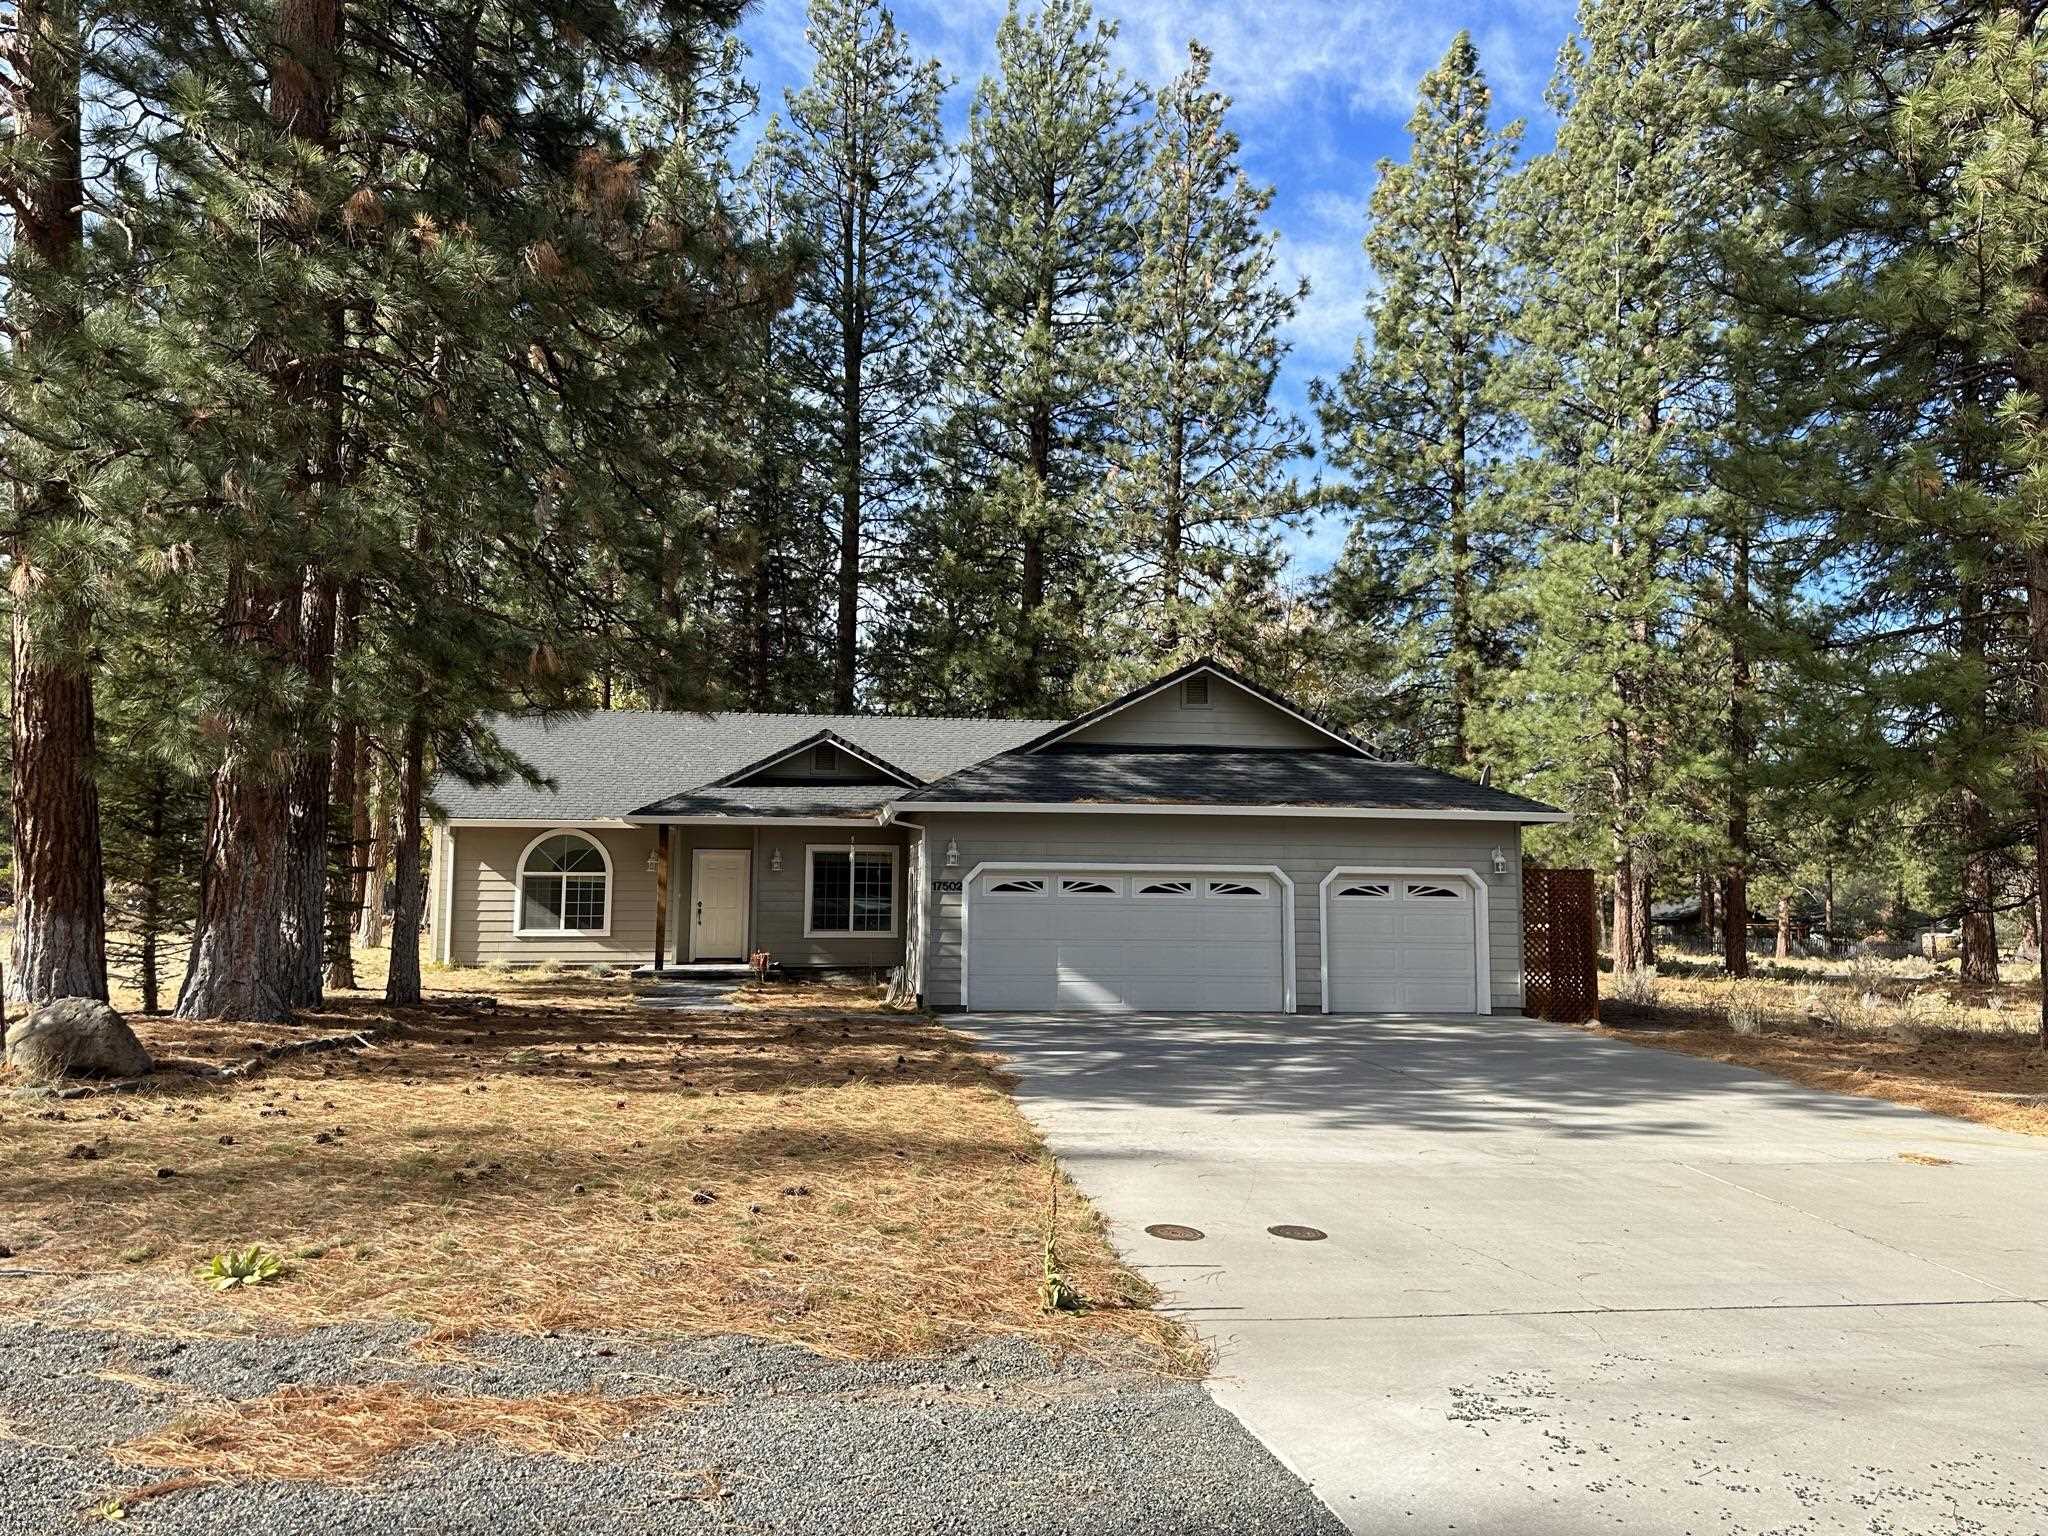 This spacious home includes many extras like gas fireplace, large kitchen with eating bar area, tall windows to bring in extra light and hardi-plank siding.  Extra large 3 car garage provides ample space for tons of storage.  Large flat landscaped corner lot in a great location on private culdesac and surrounded by tall pine trees.  Backyard is fully fenced and large back patio perfect for entertaining.